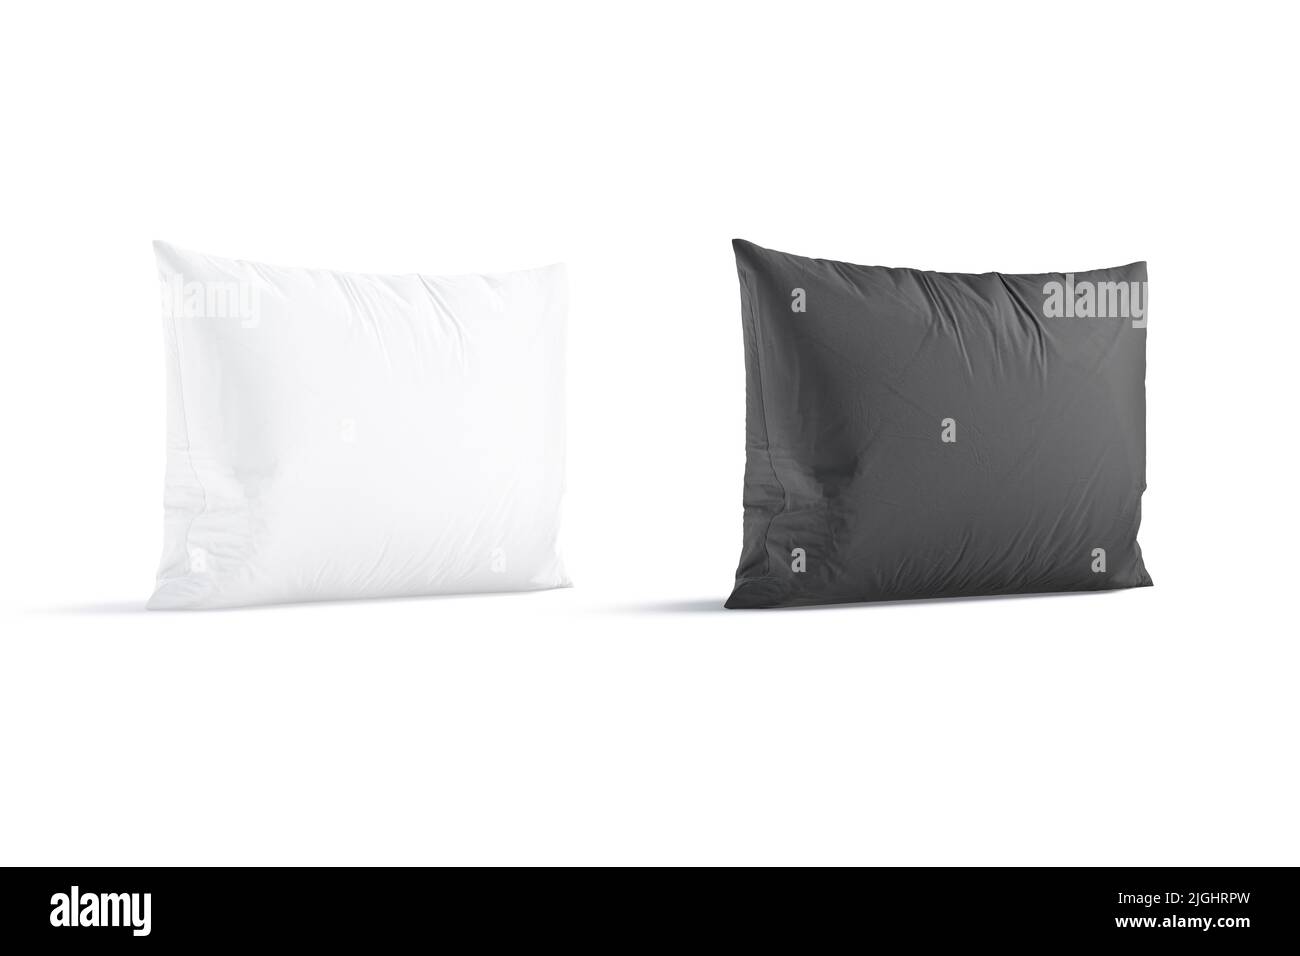 Blank black and white rectangular pillow mockup stand, side view Stock Photo